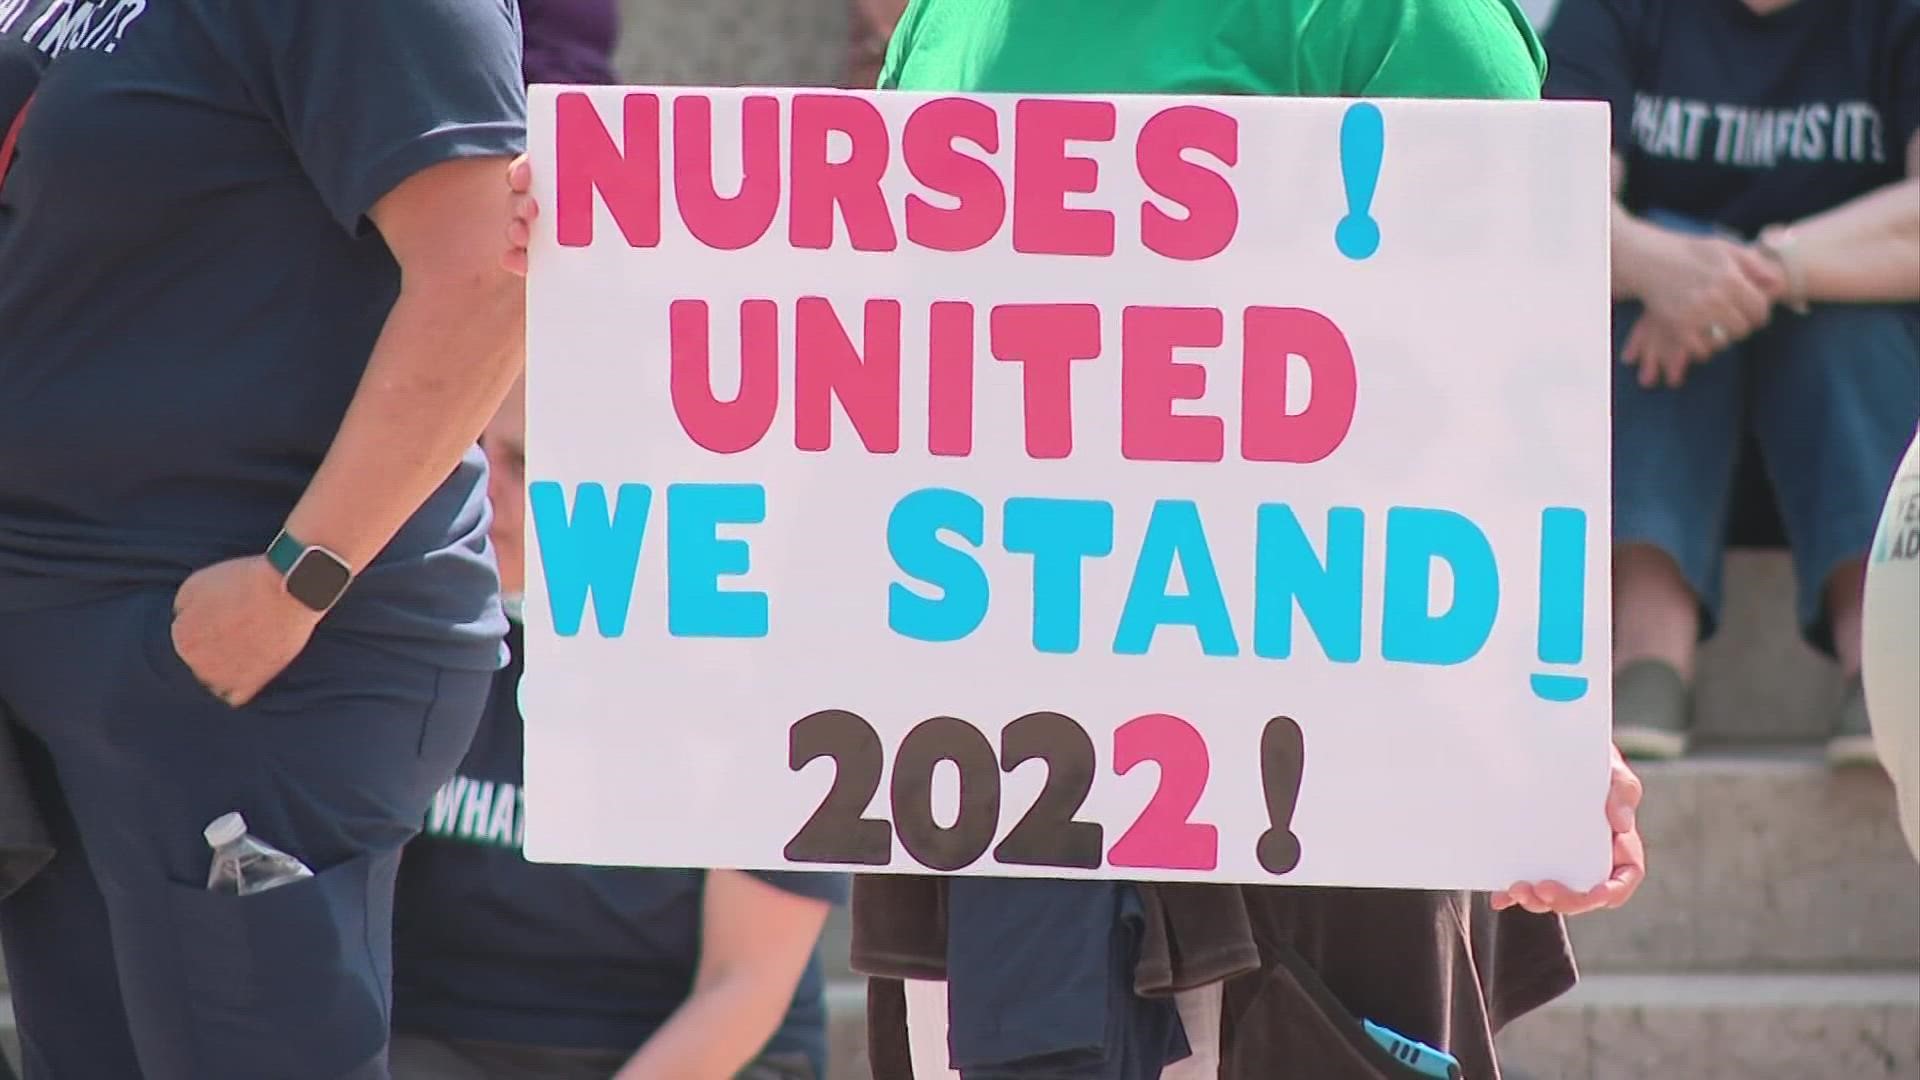 The Ohio Nurses Association organized the event on the final day of National Nurses Week.